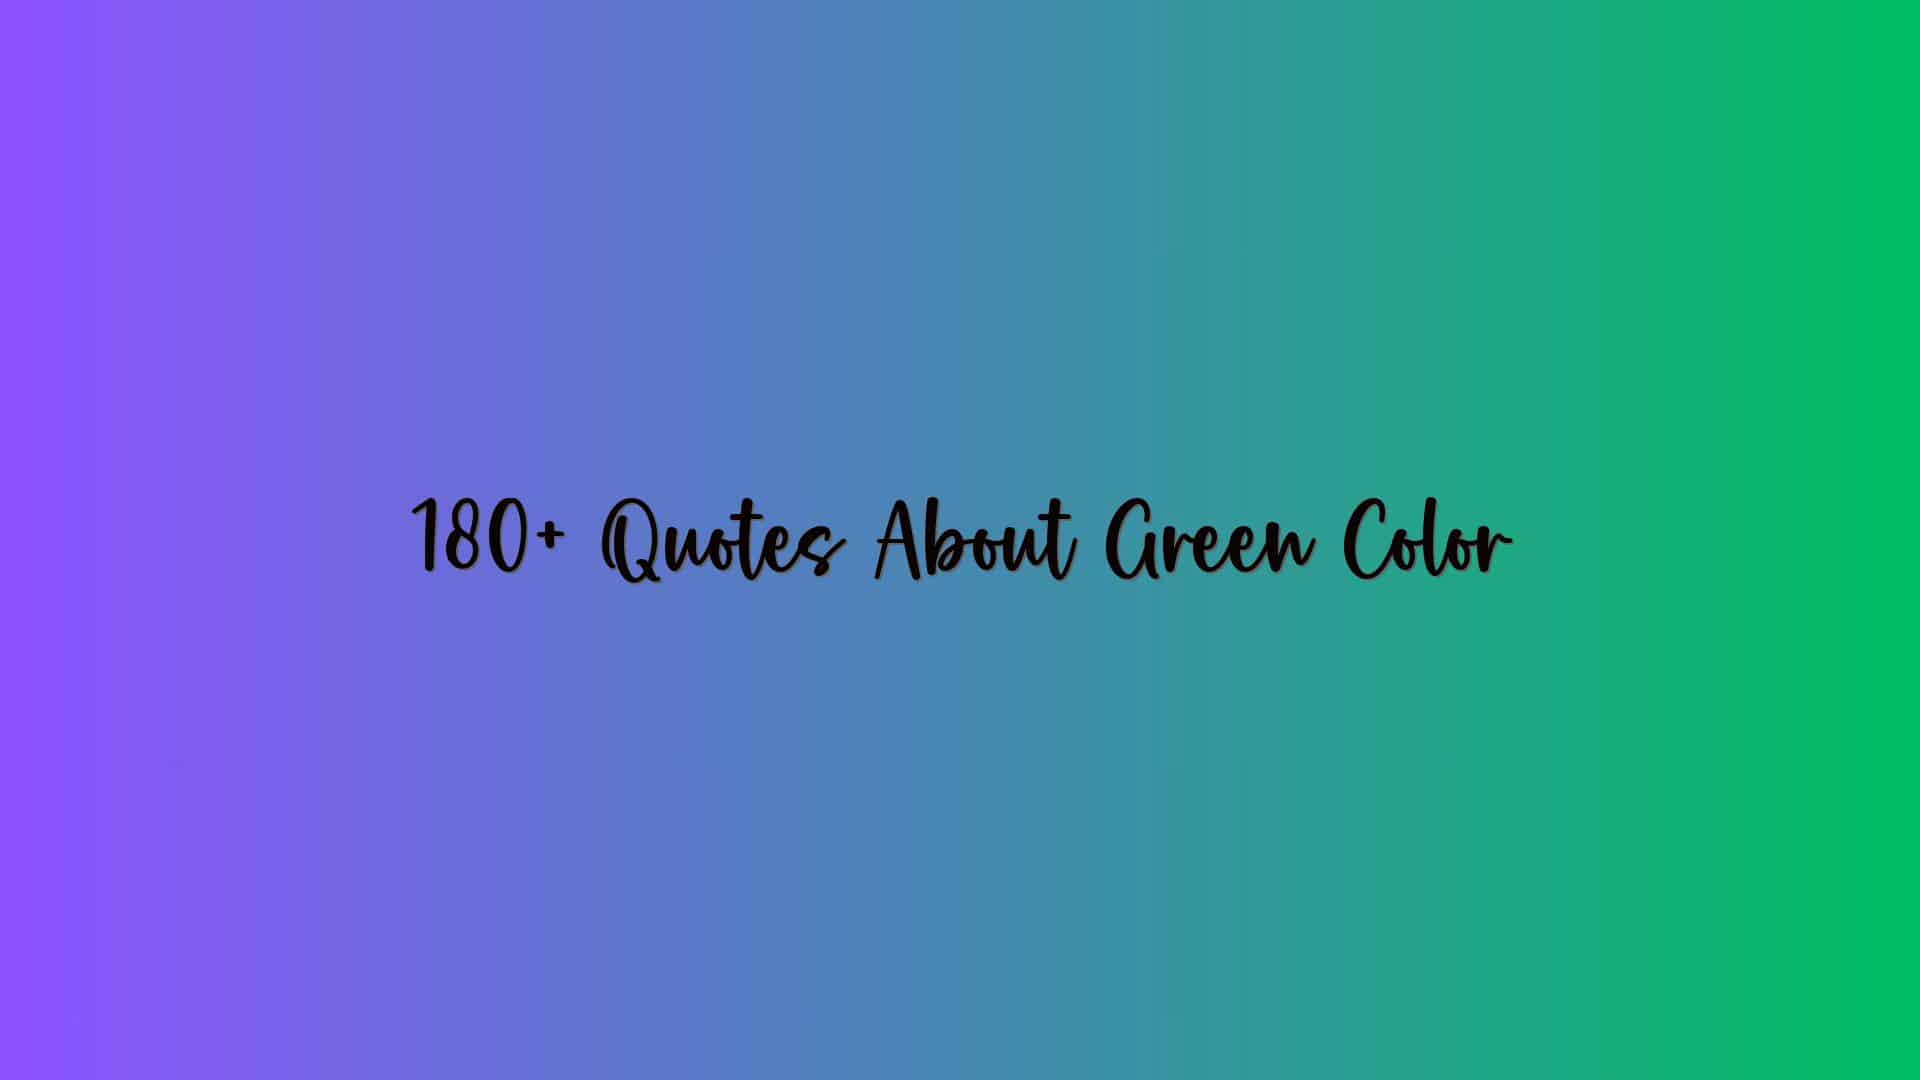 180+ Quotes About Green Color